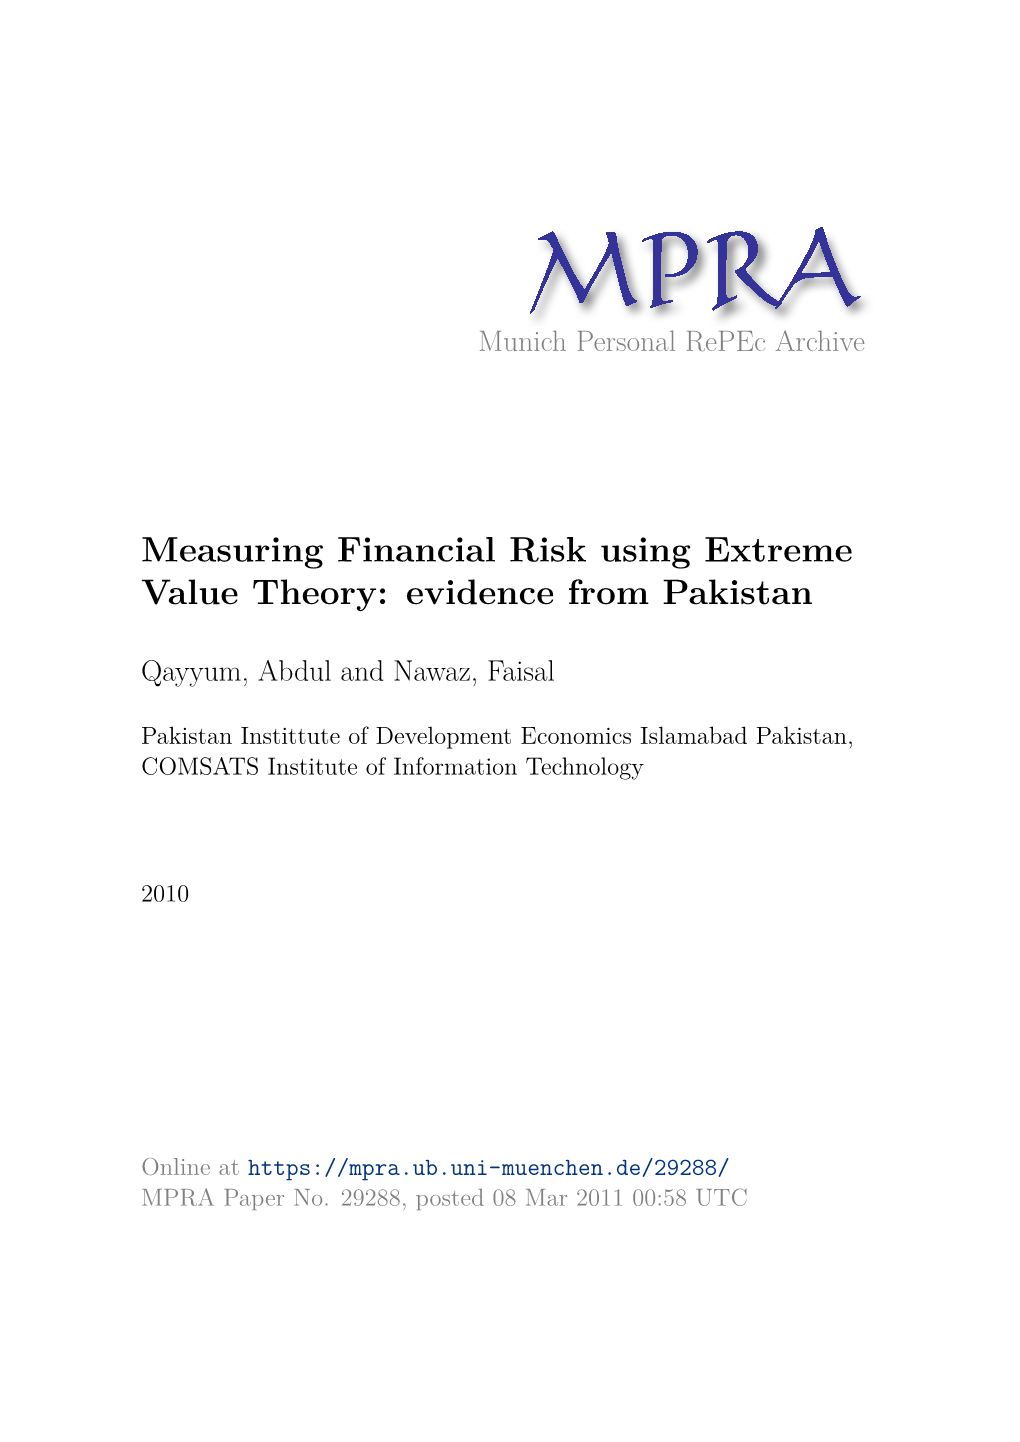 Measuring Financial Risk Using Extreme Value Theory: Evidence from Pakistan